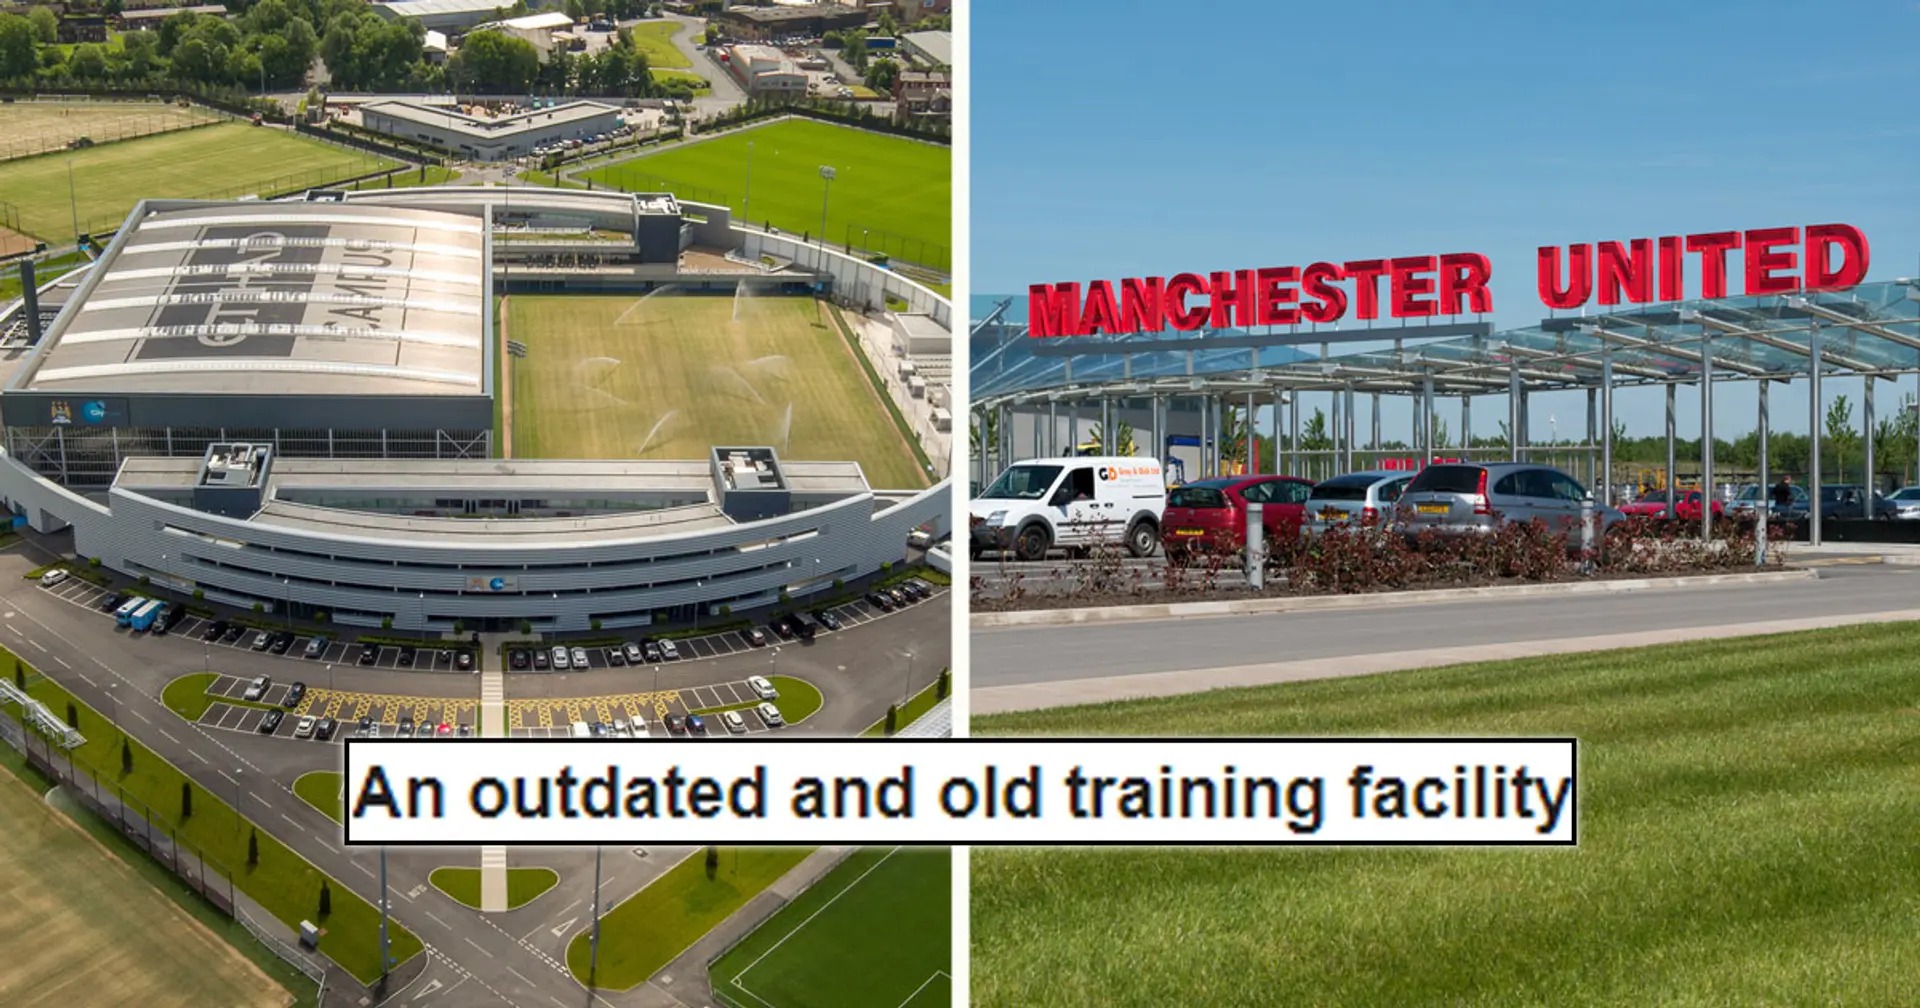 United fans react to worrying update on Carrington facility